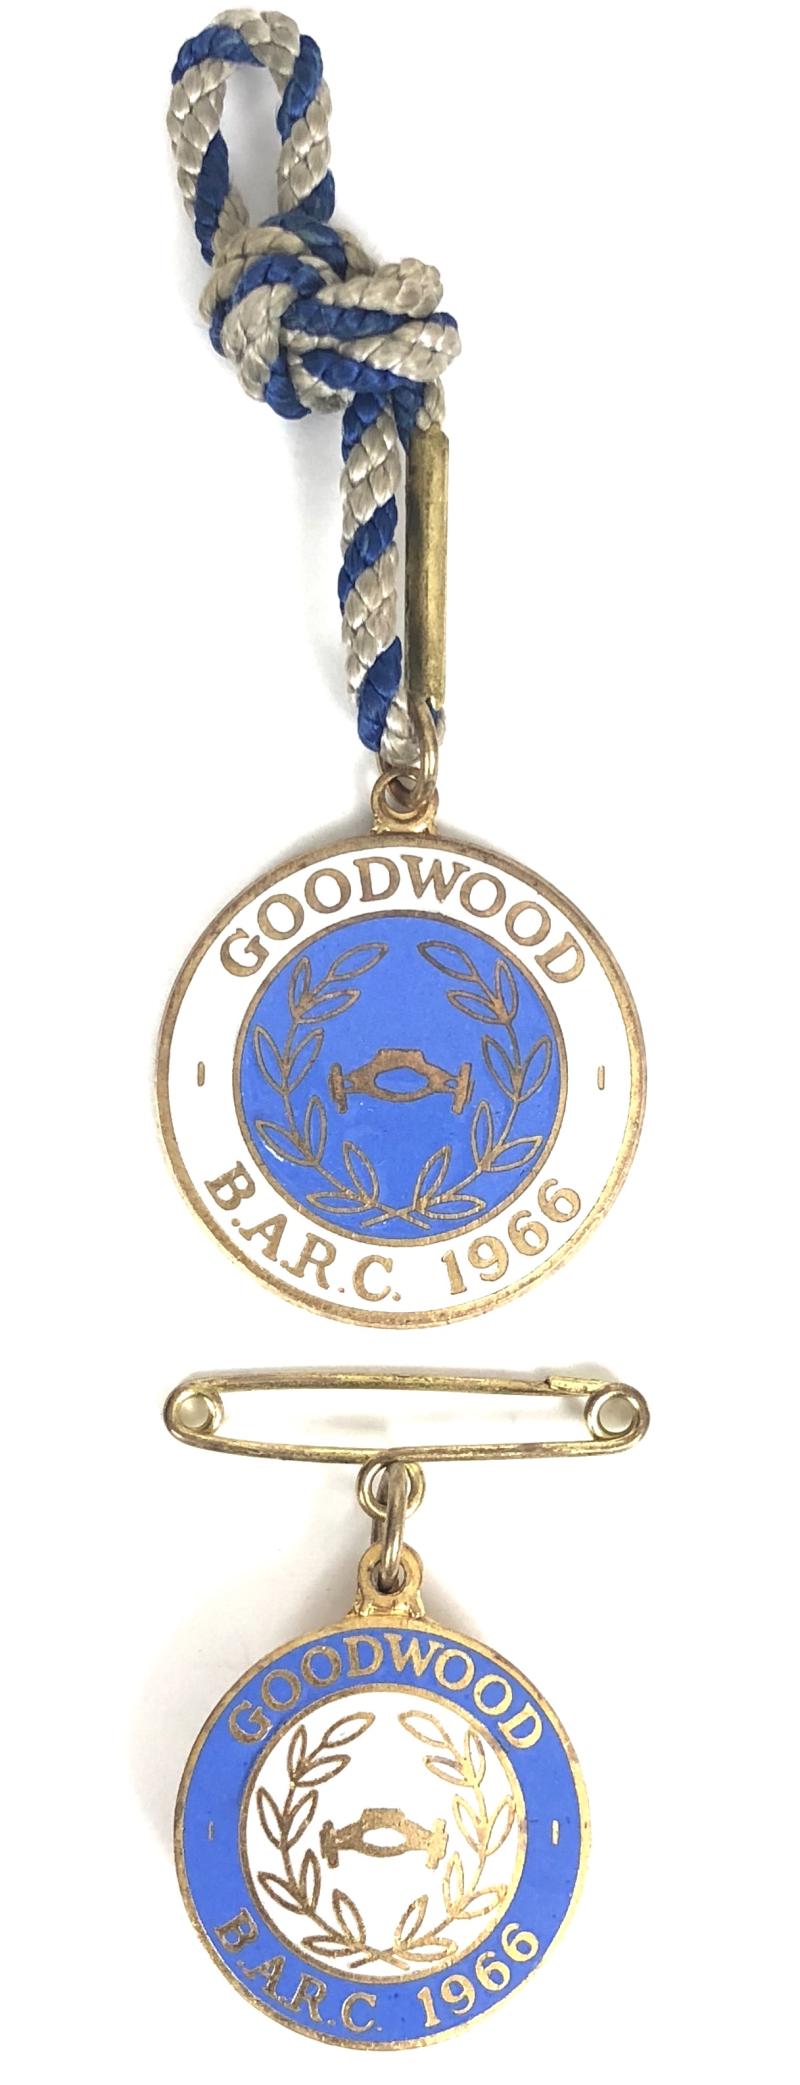 1966 British Automobile Racing Club BARC Goodwood badges matching numbers